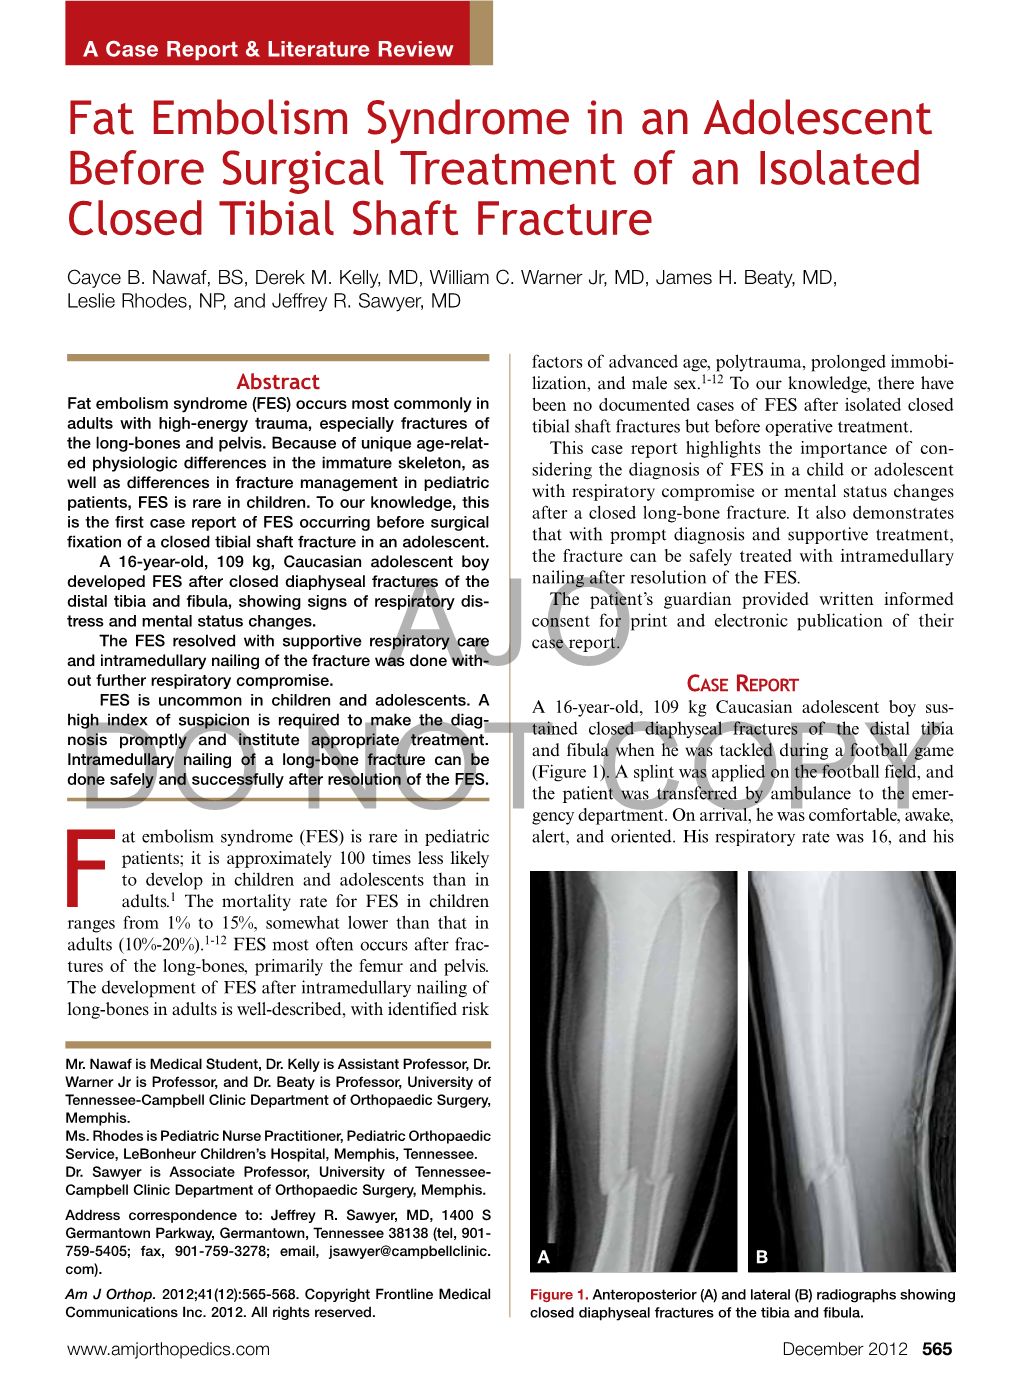 Fat Embolism Syndrome in an Adolescent Before Surgical Treatment of an Isolated Closed Tibial Shaft Fracture